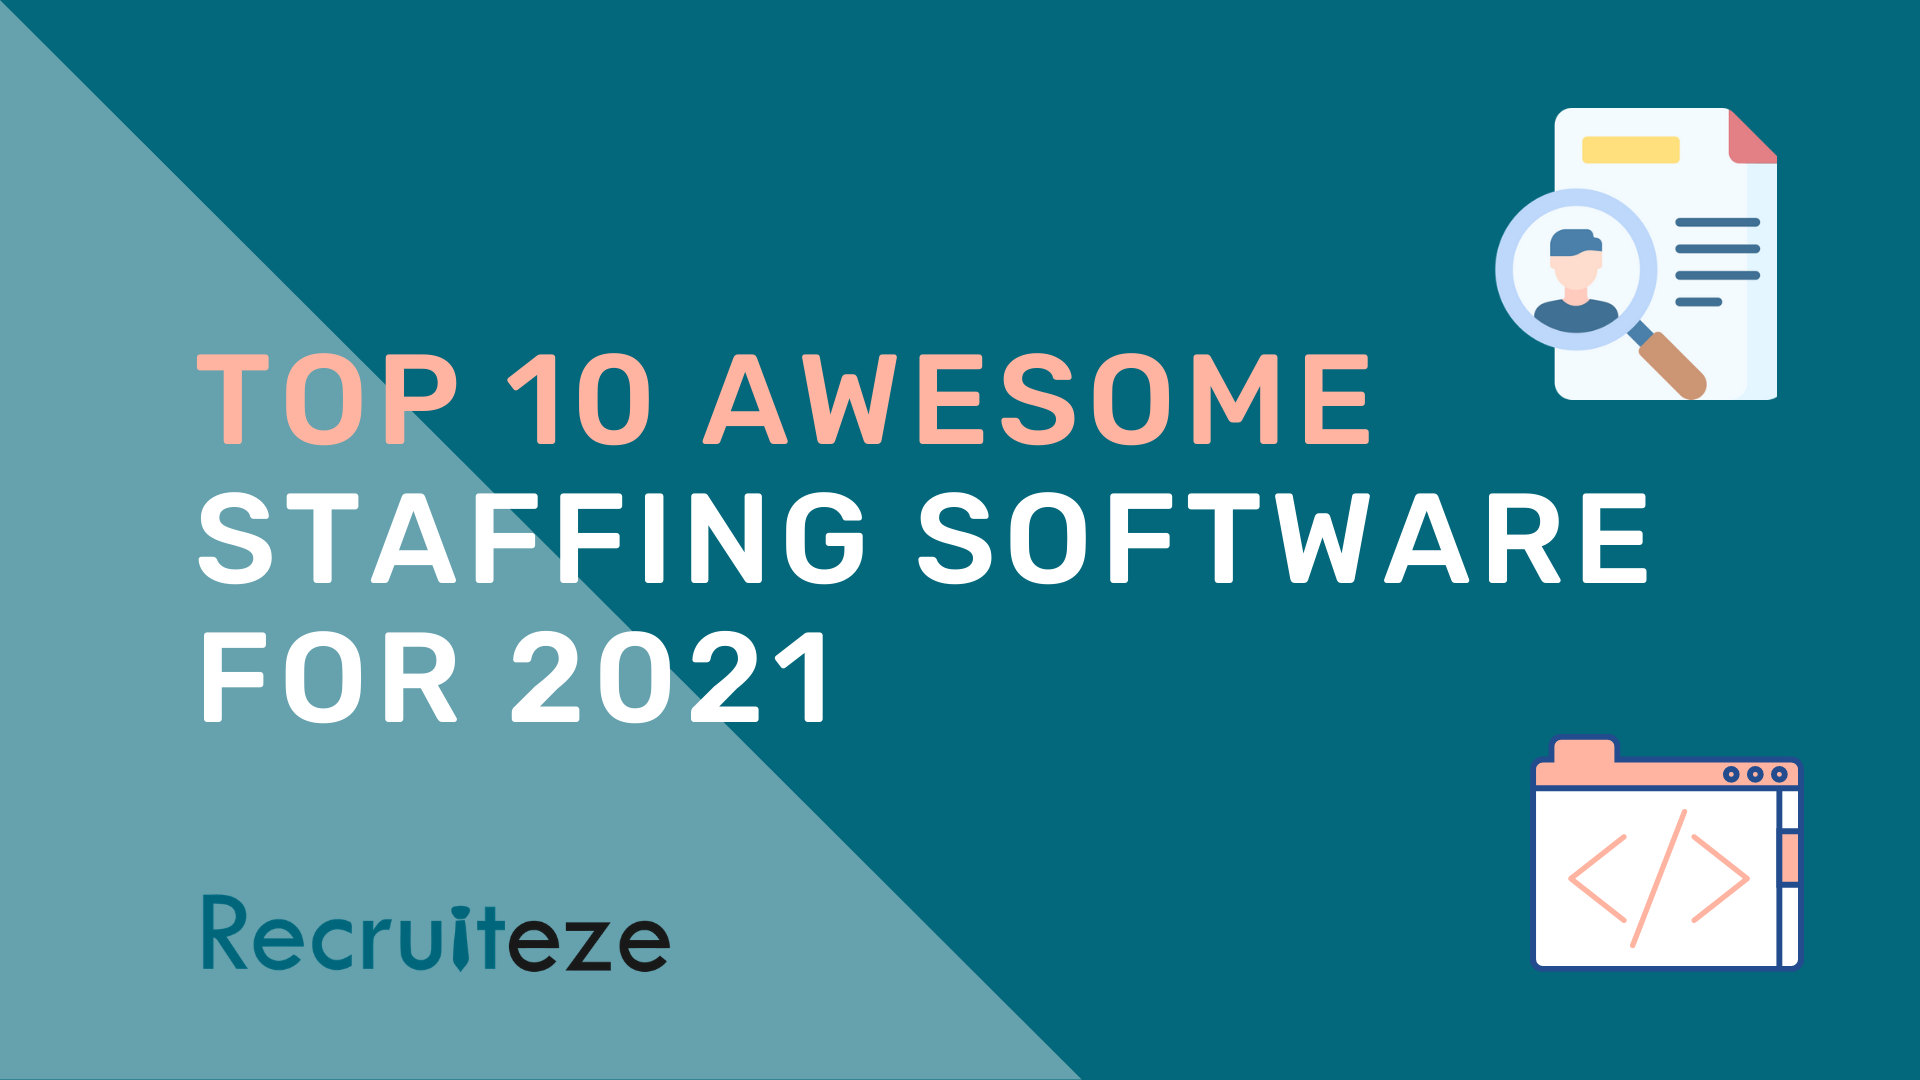 Recruiteze FI: Top 10 Awesome Staffing Software for 2021